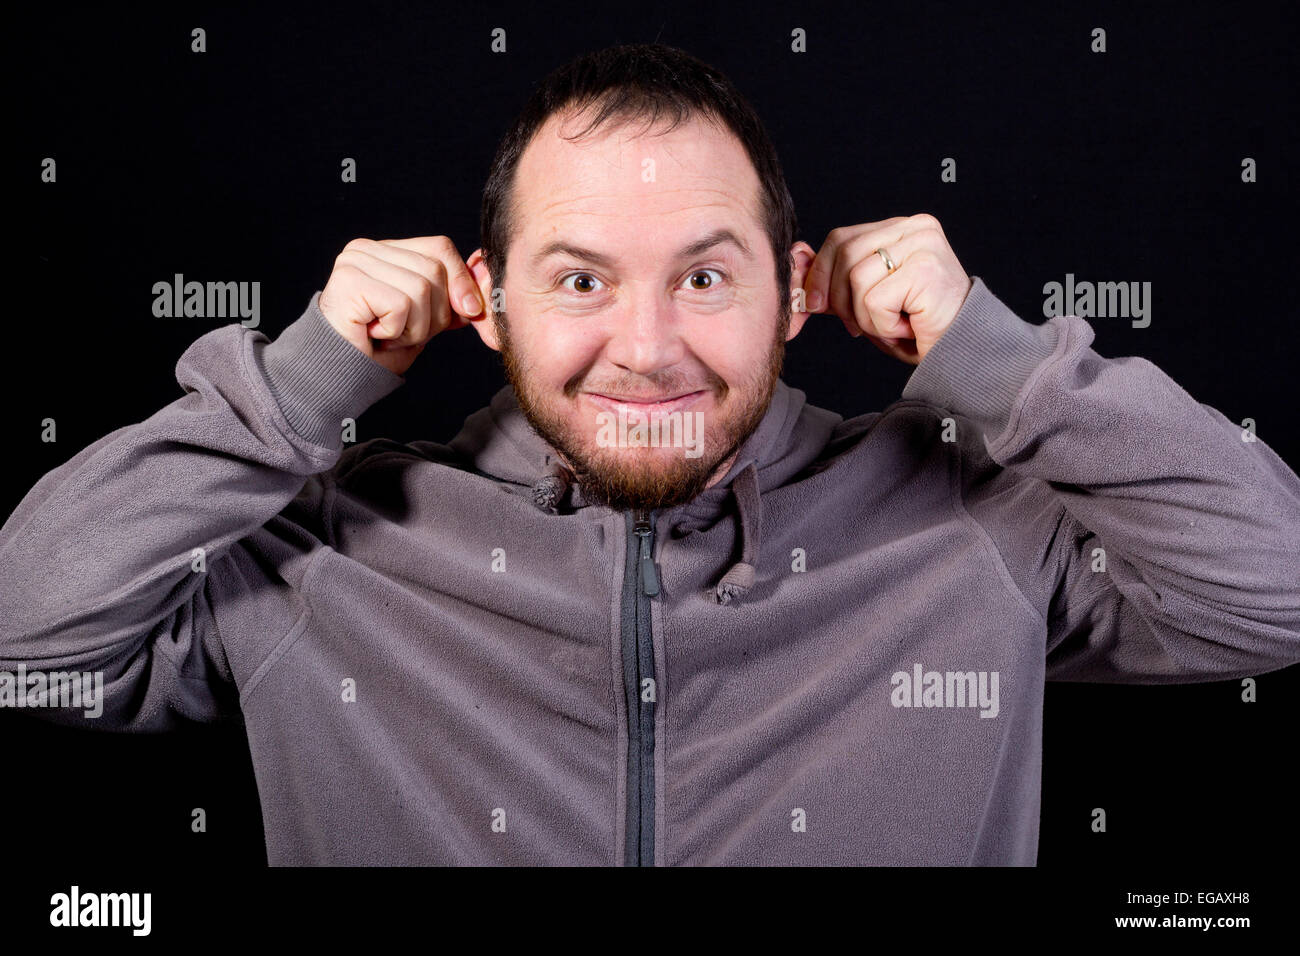 young man making a funny face isolated on black Stock Photo